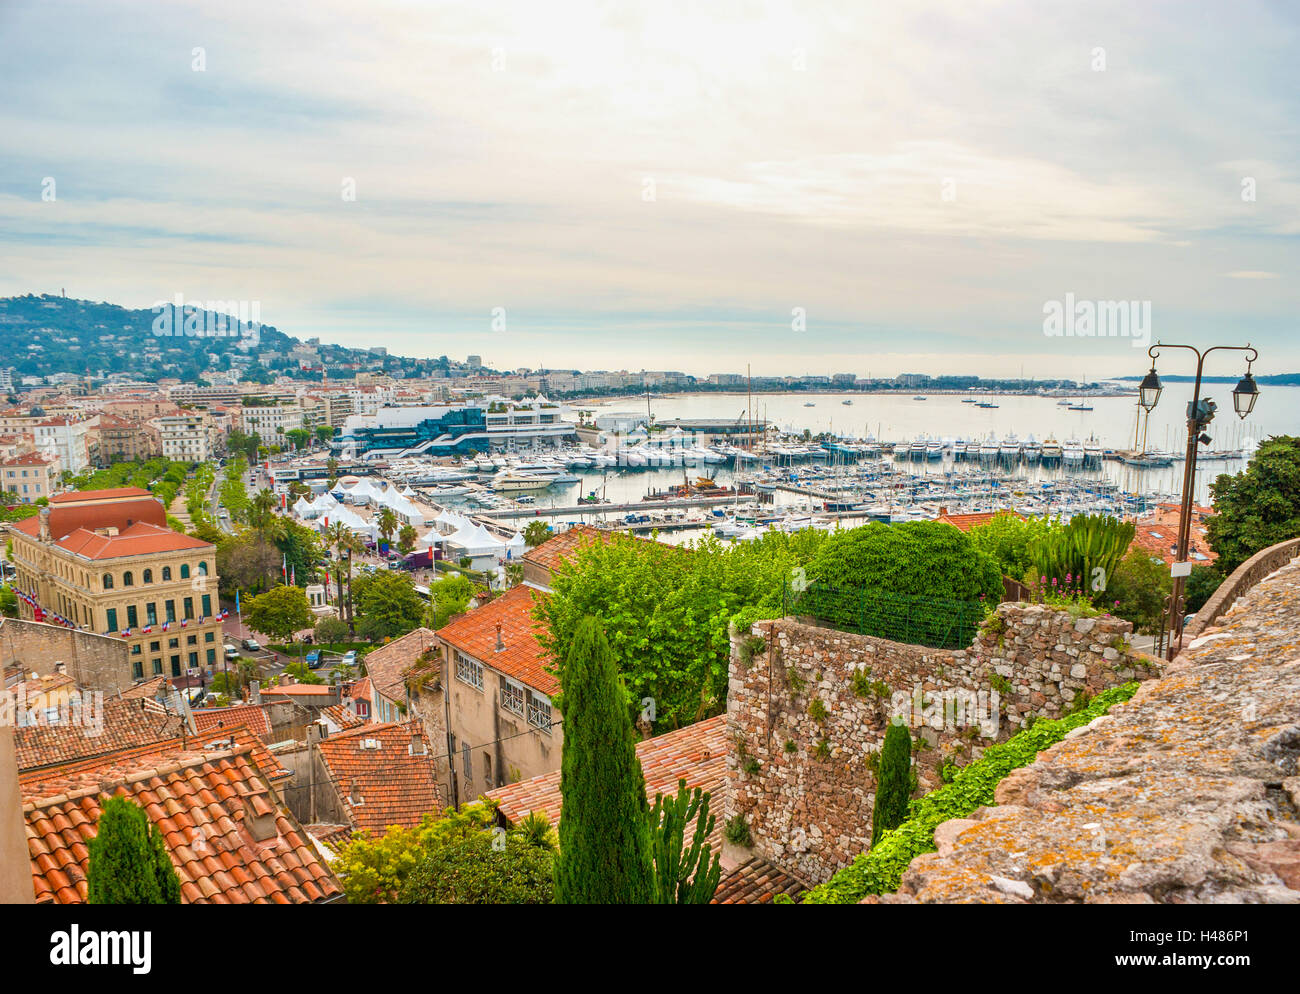 The aerial view on Boulevard de la Croisette and the old port of Cannes, France. Stock Photo